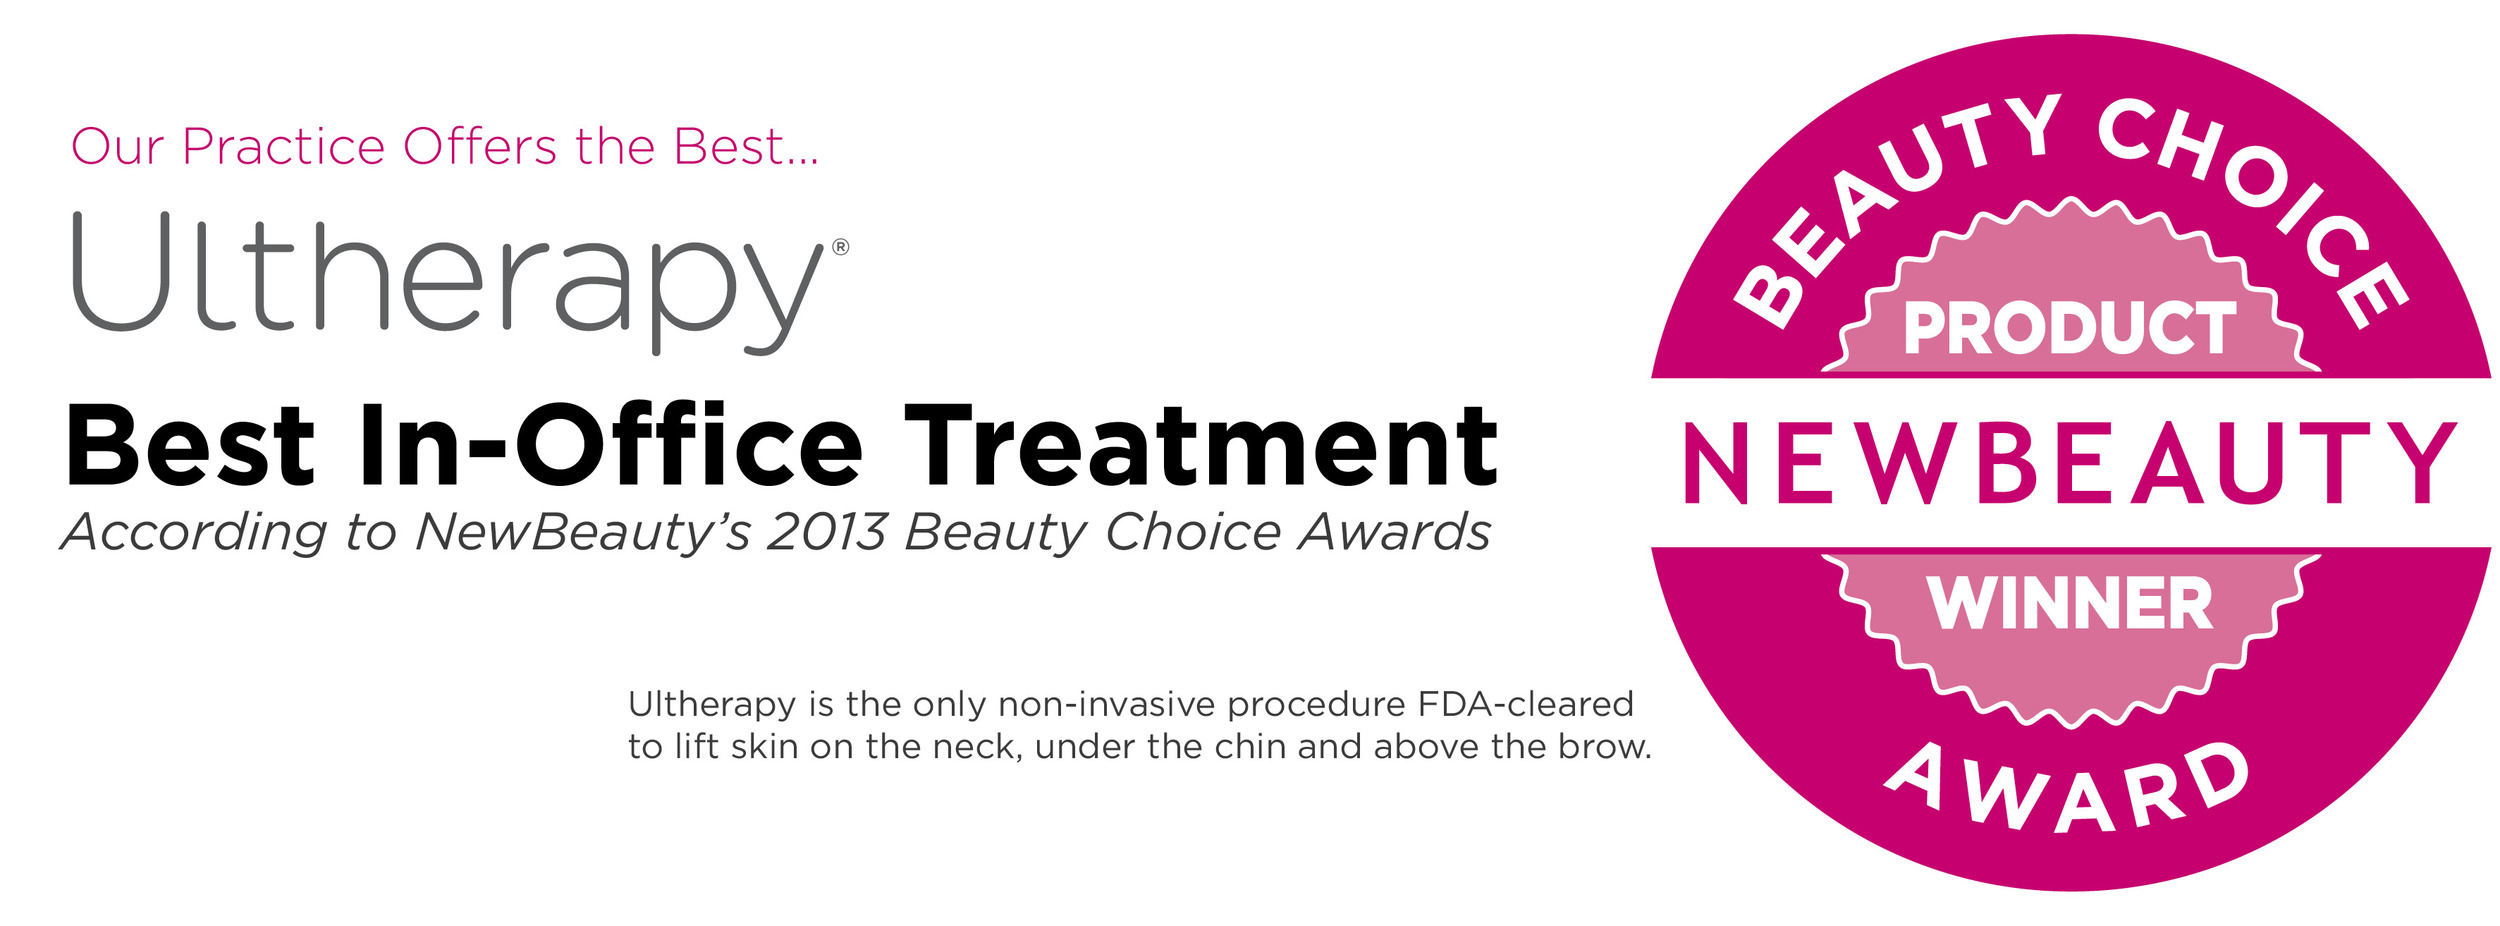 Ultherapy Named “Best In-Office Treatment” in NewBeauty’s Annual Beauty Choice Awards